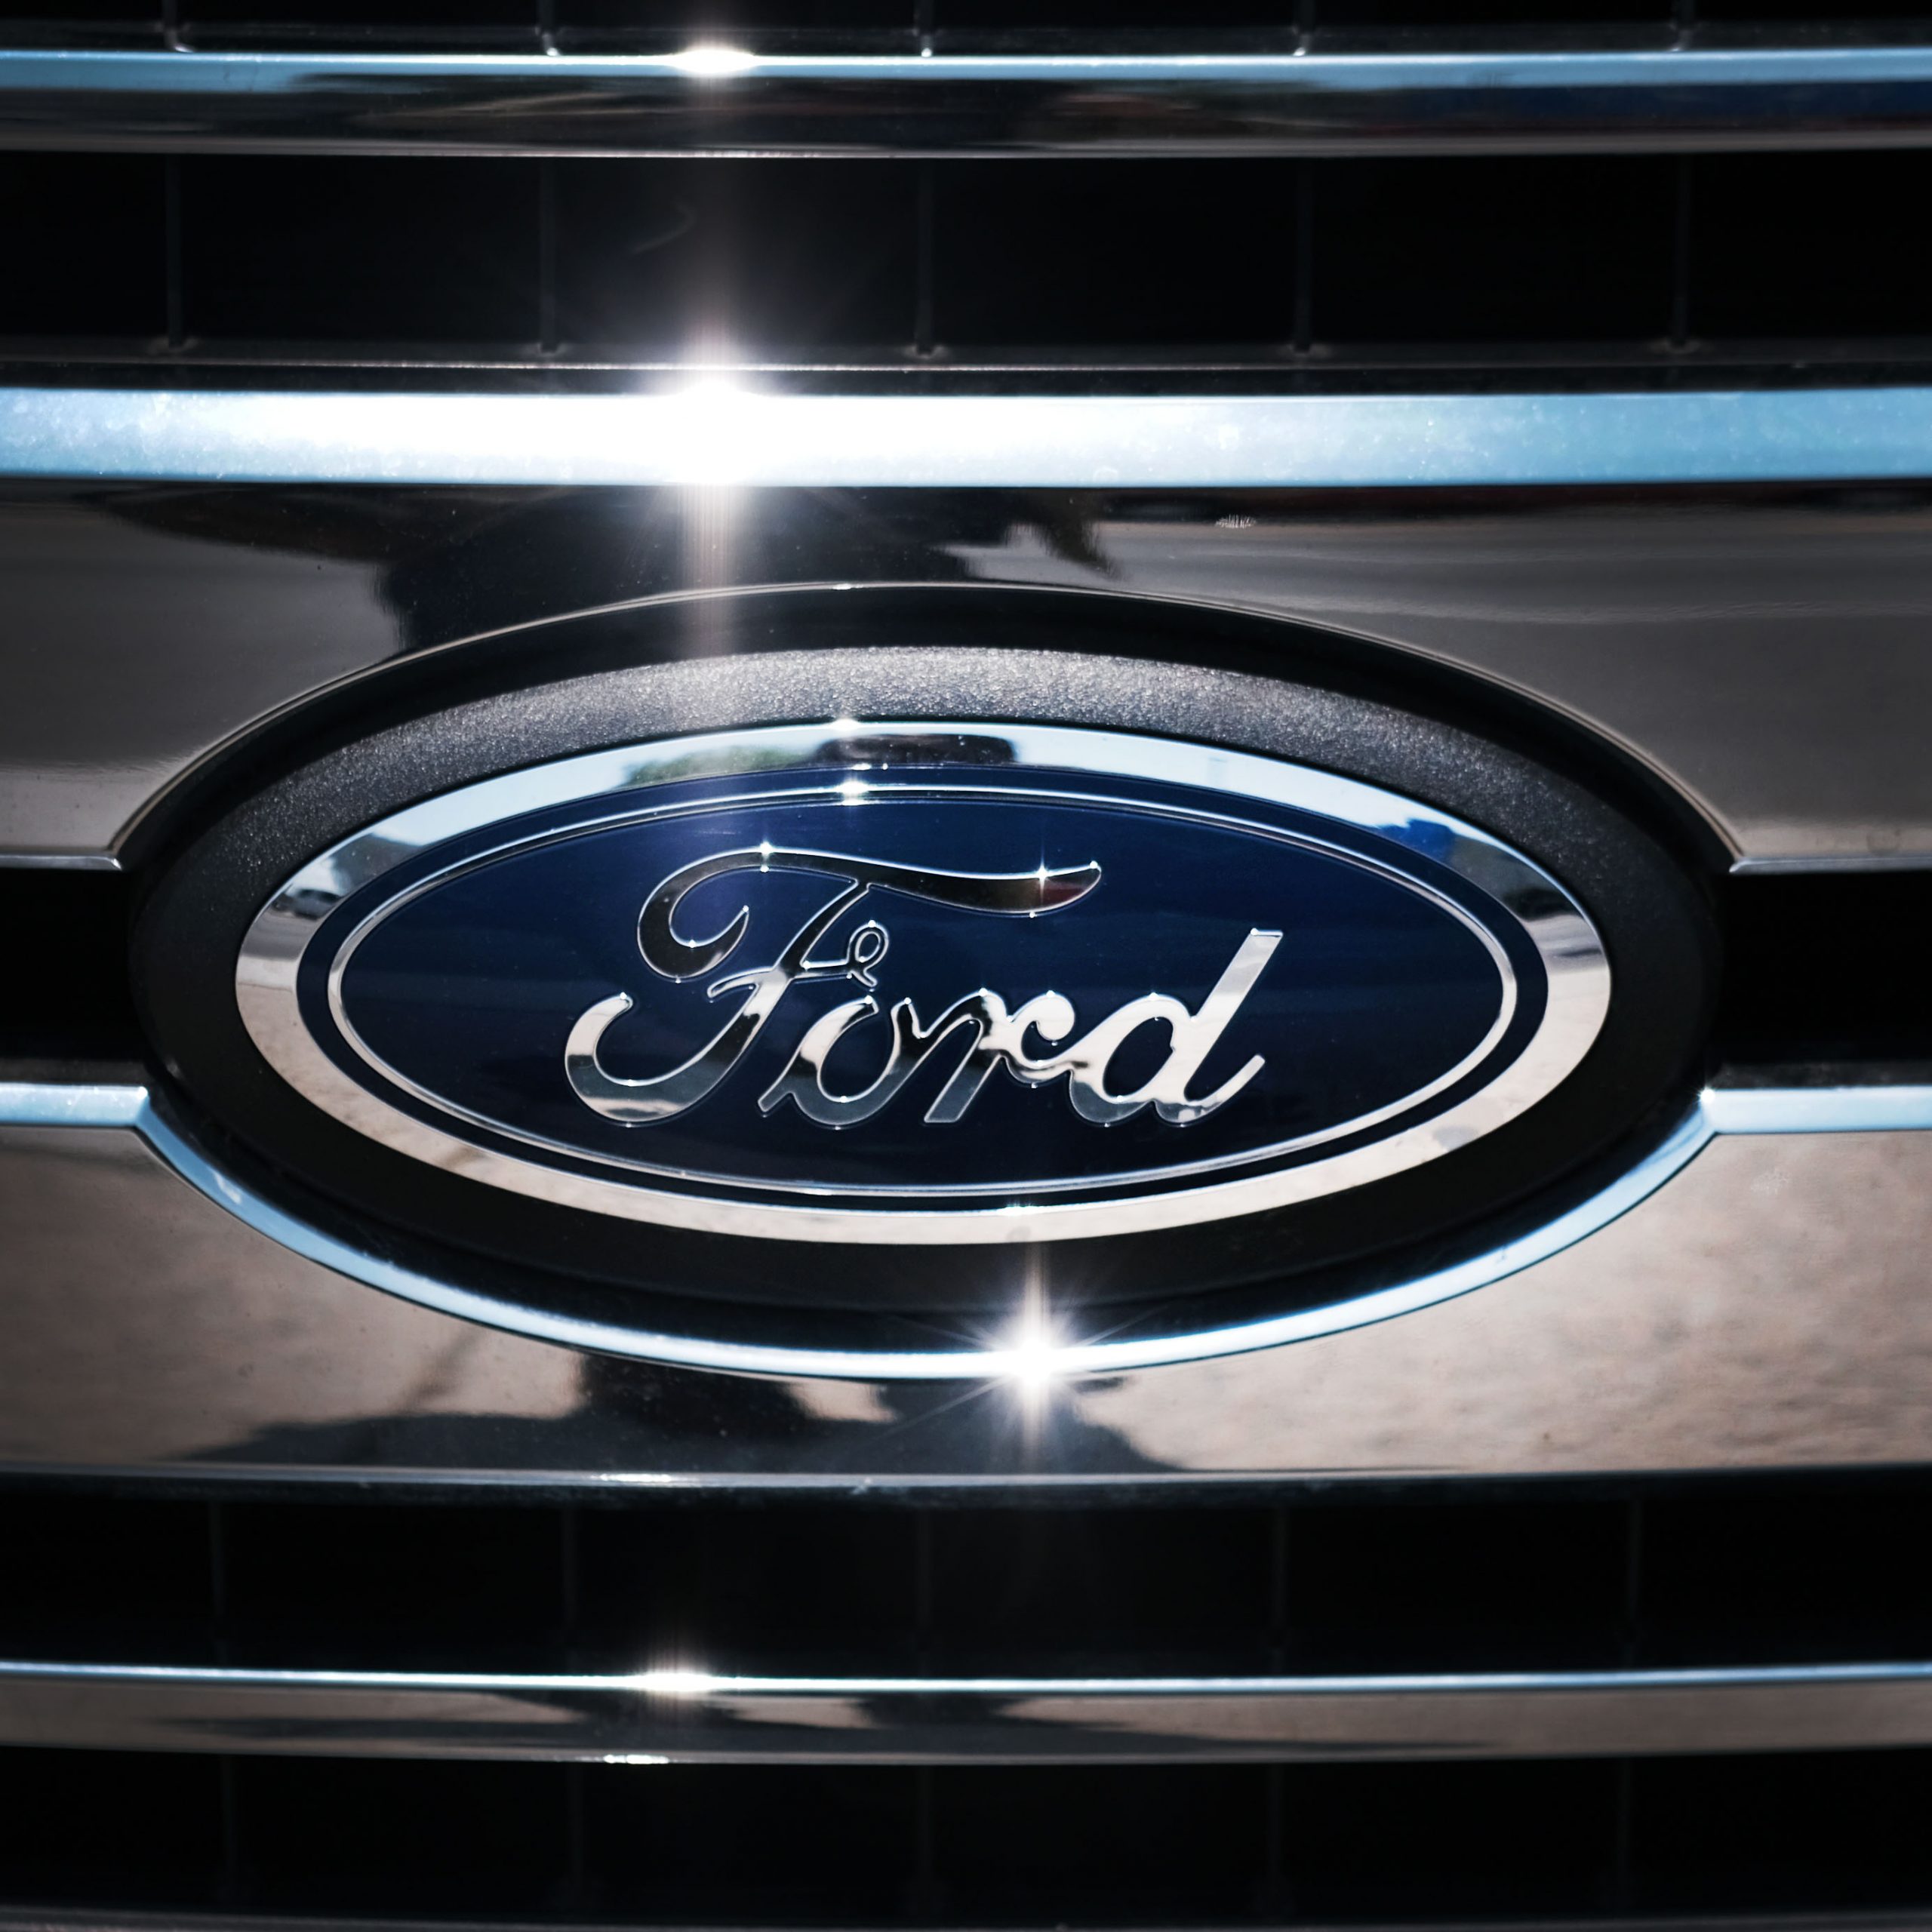 Ford logo on the grille of a new ford model